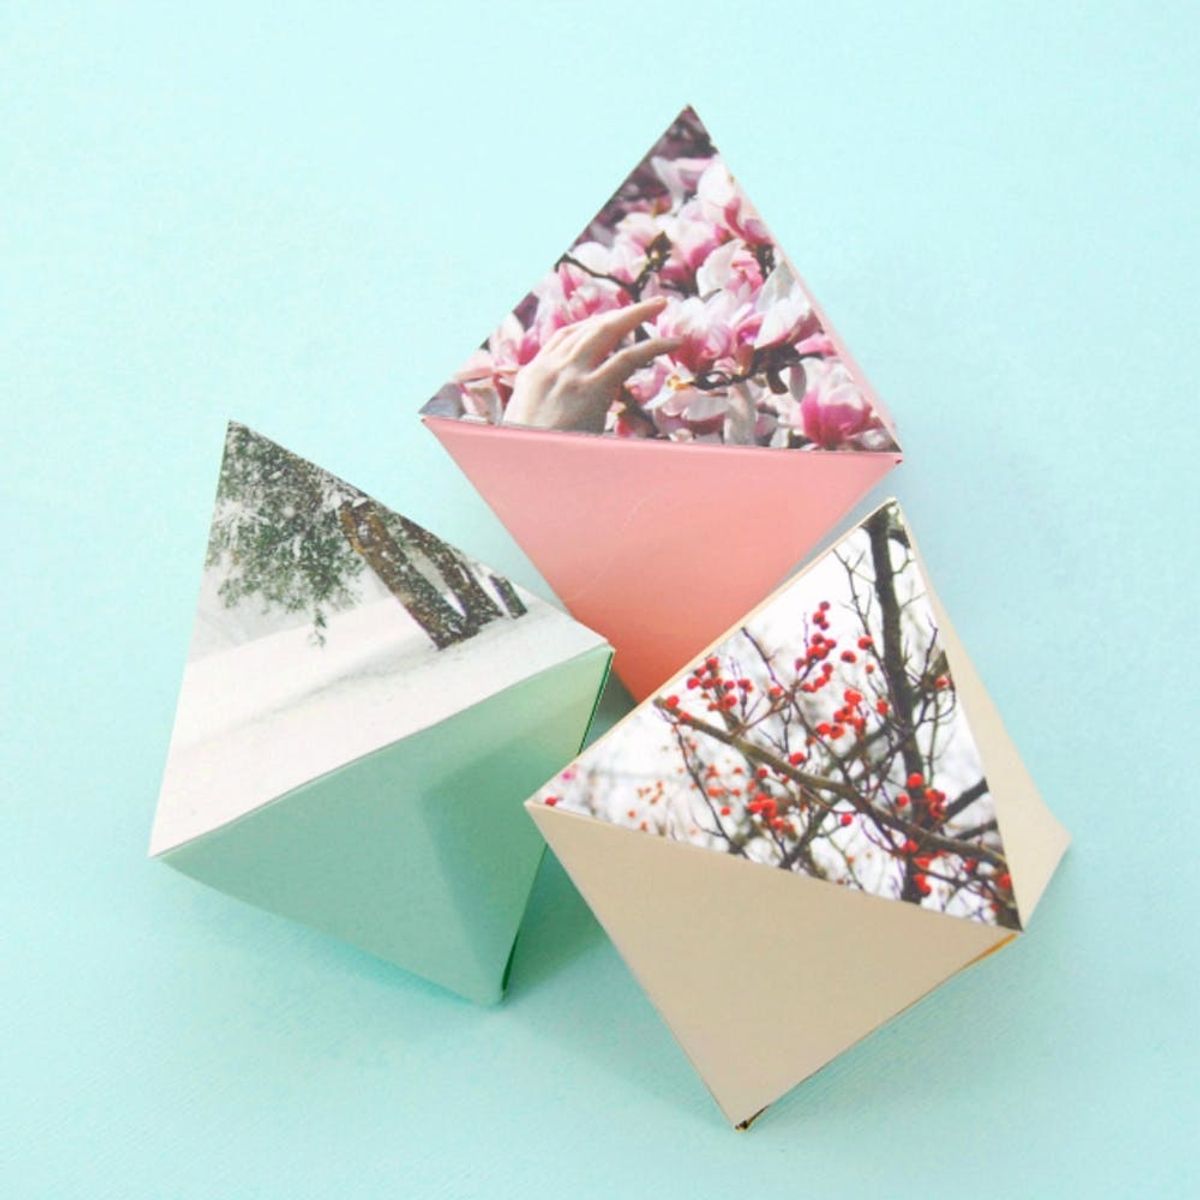 How to Make Geo Ornaments With Your Favorite Photos